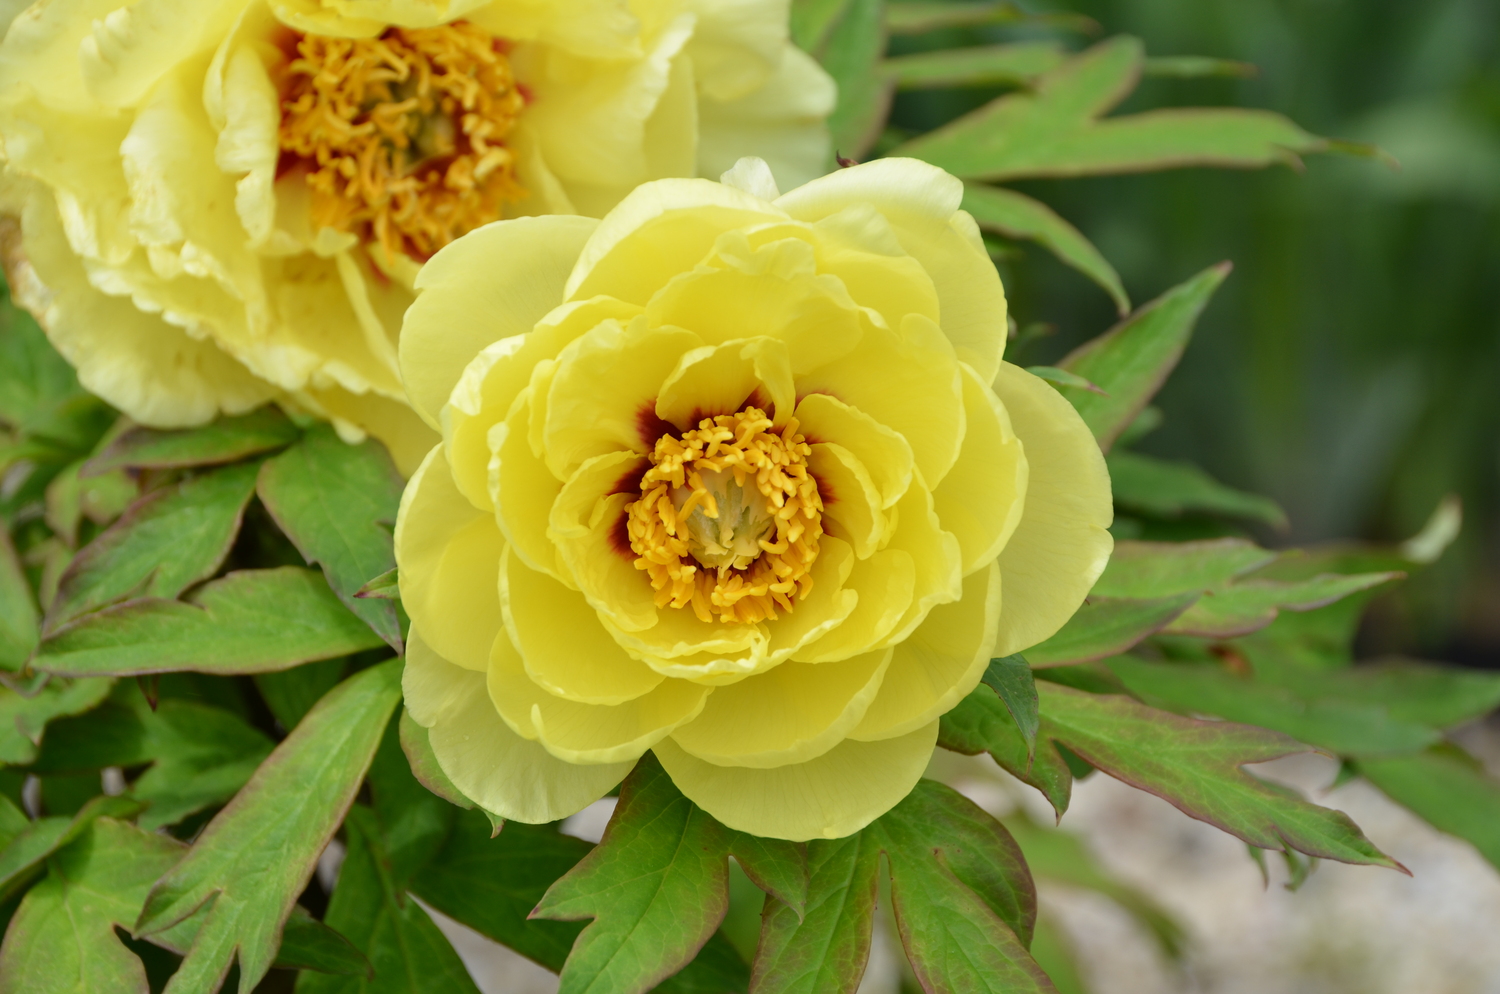 Itoh Bartzella tree peony blooming in mid-May. These tree peonies are expensive and not for the person just beginning a perennial garden. ANDREW MESSINGER